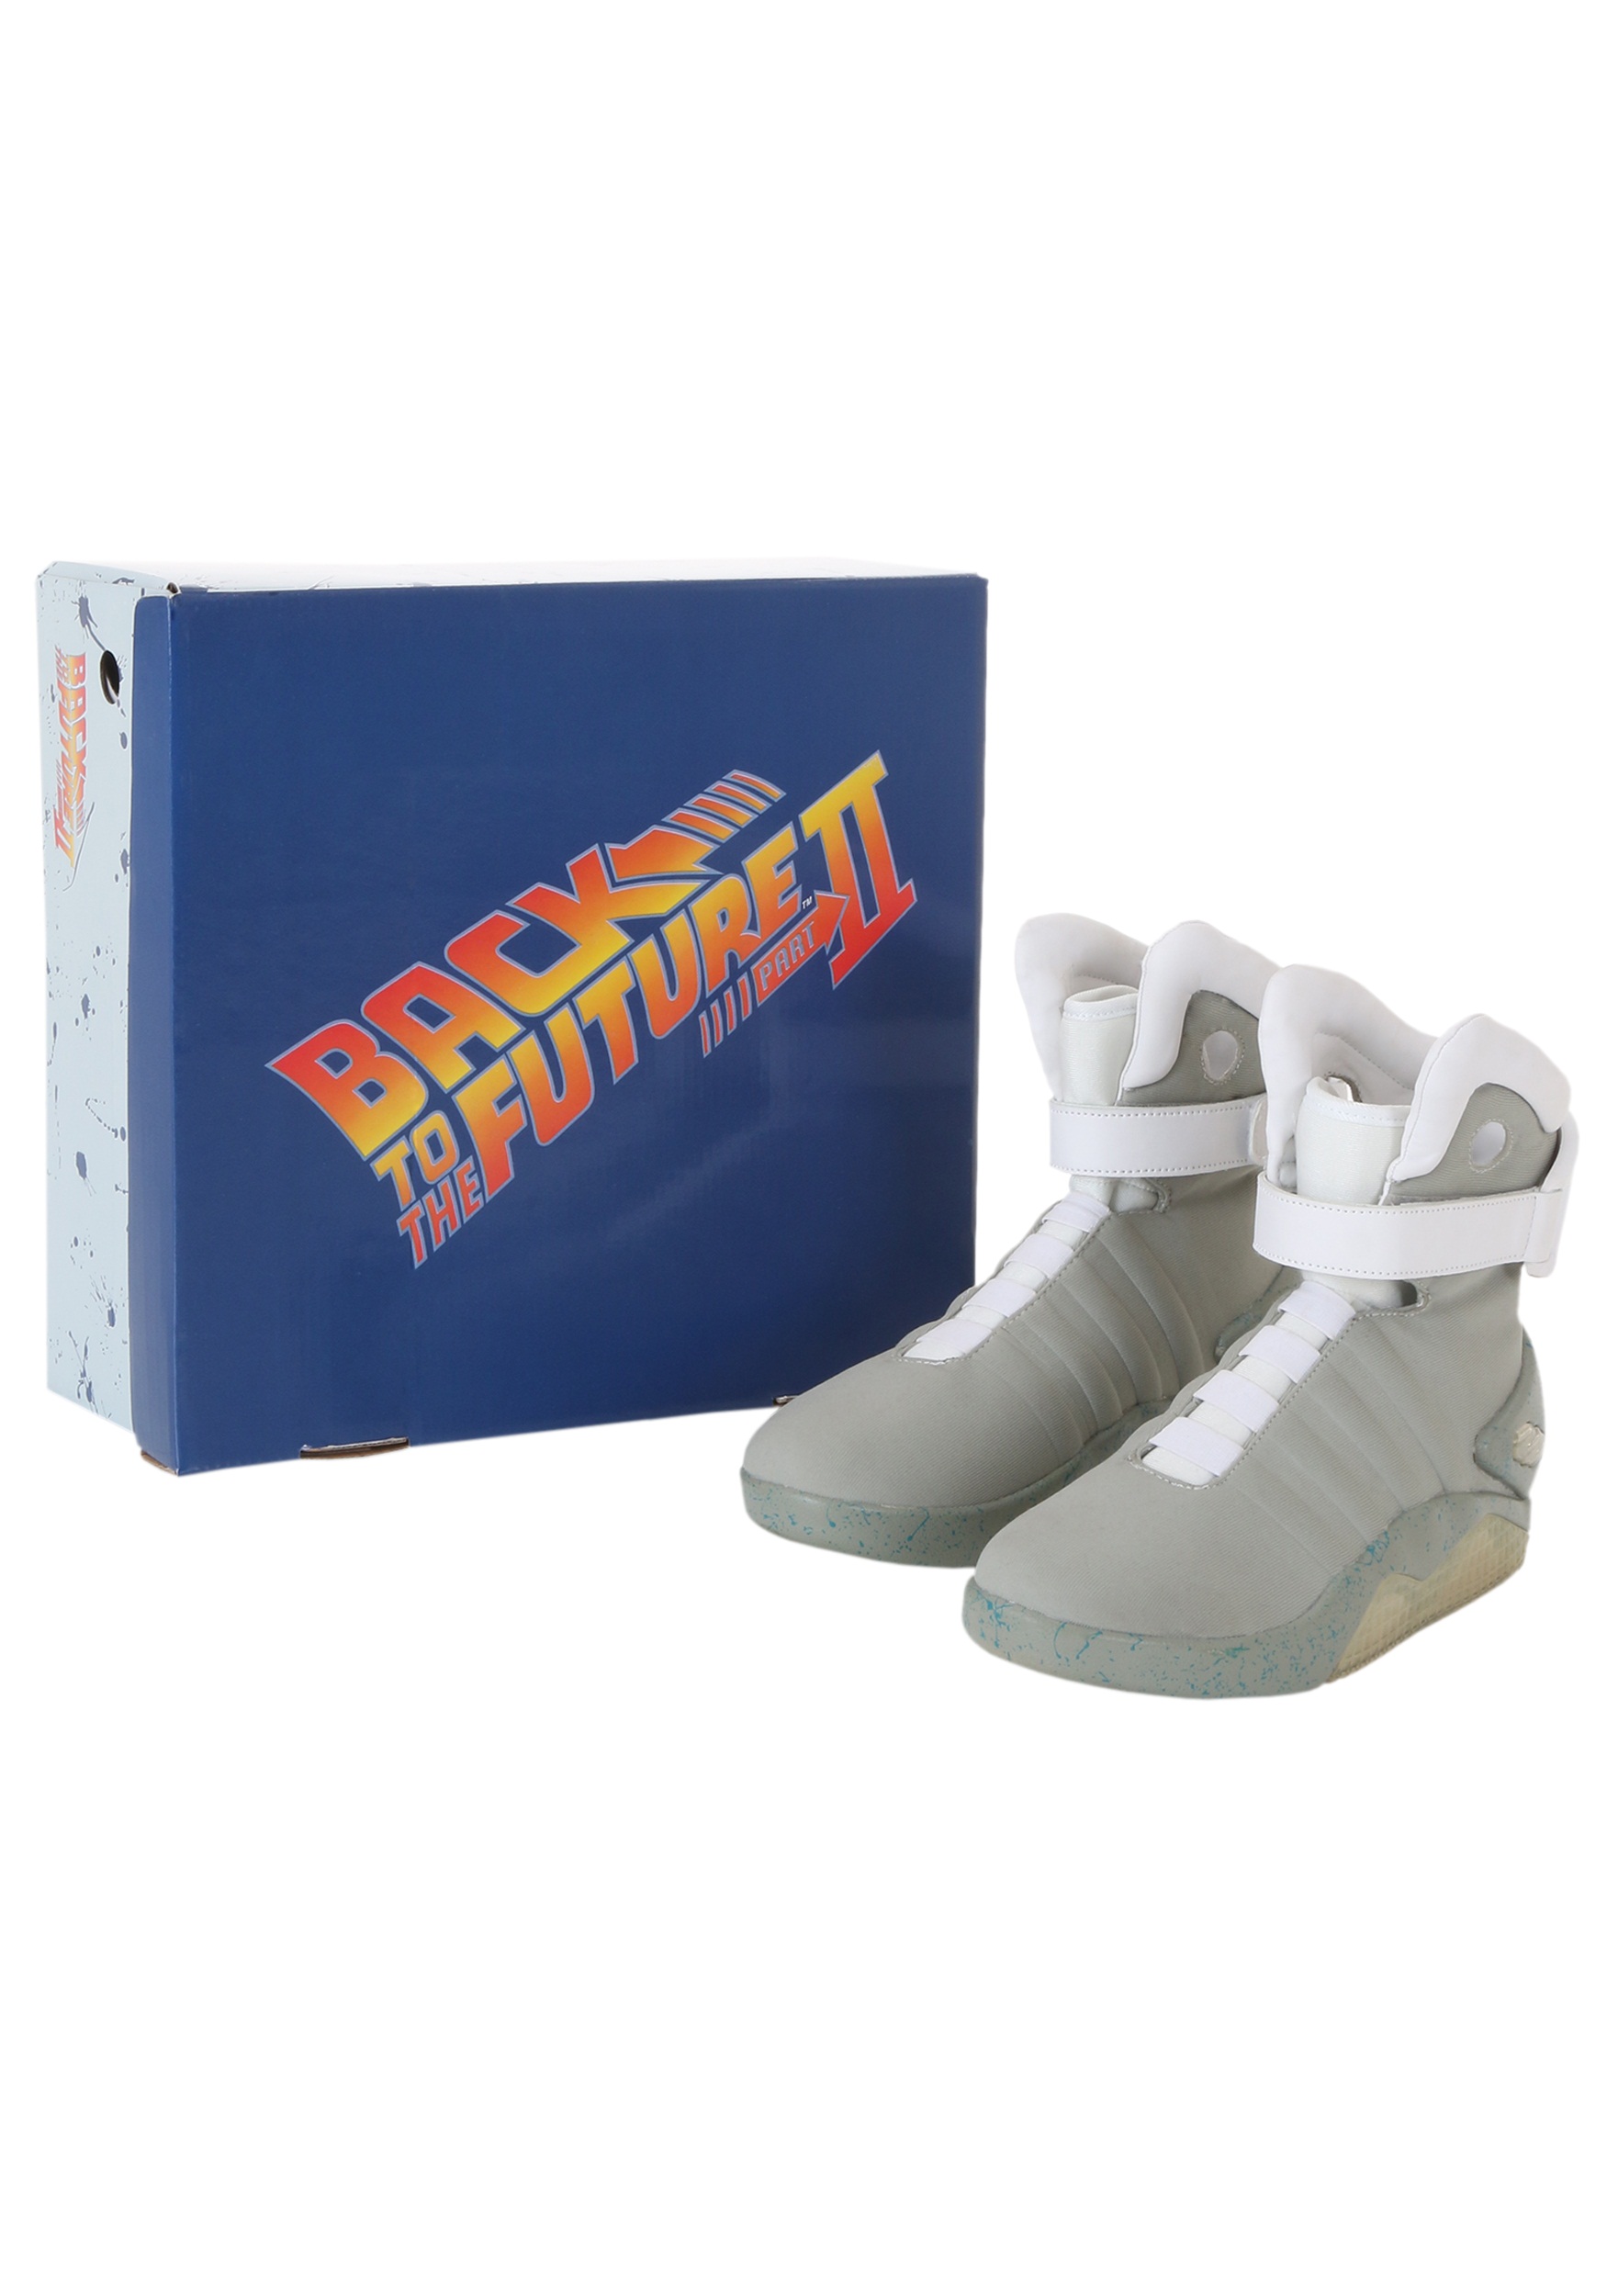 back-to-the-future-2-light-up-shoes-alt-1.jpg